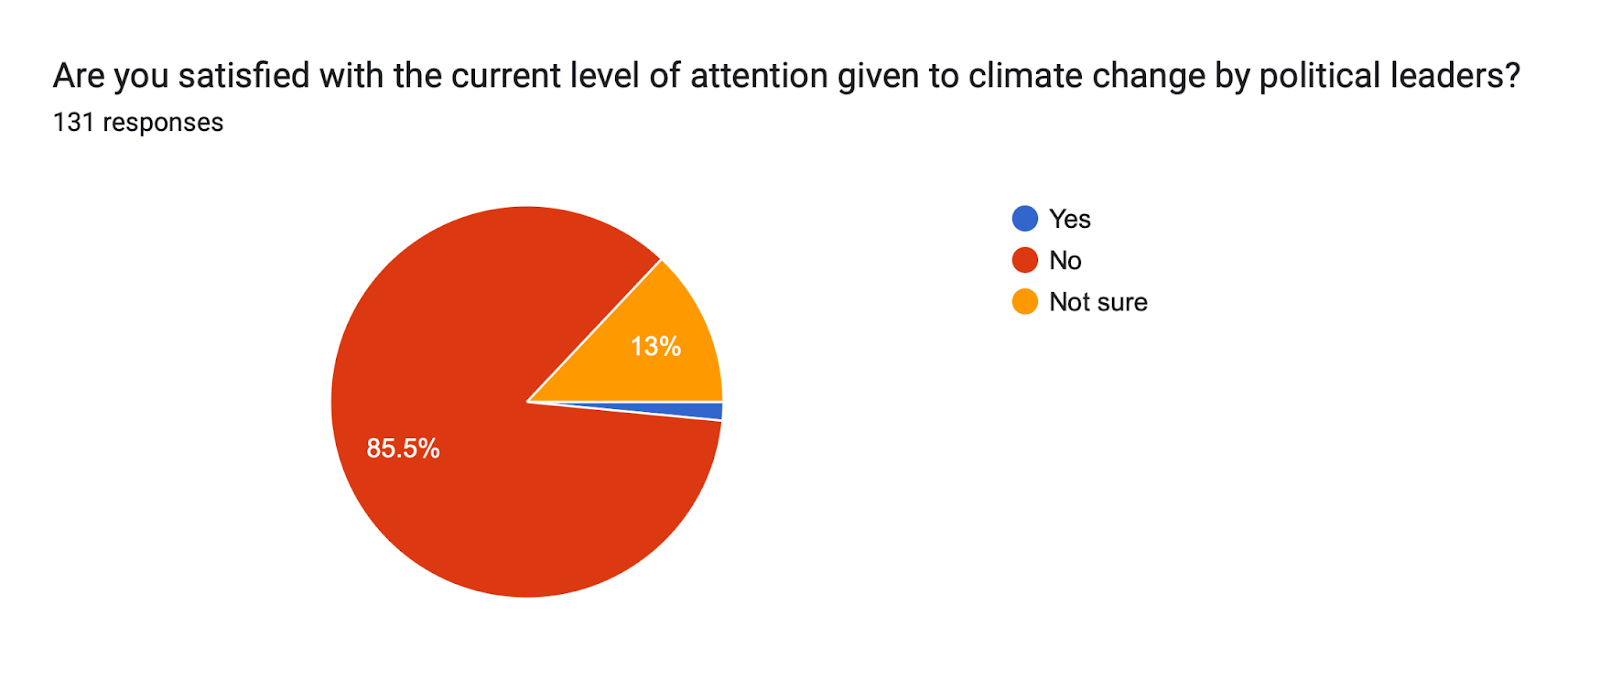 Forms response chart. Question title: Are you satisfied with the current level of attention given to climate change by political leaders?

. Number of responses: 131 responses.